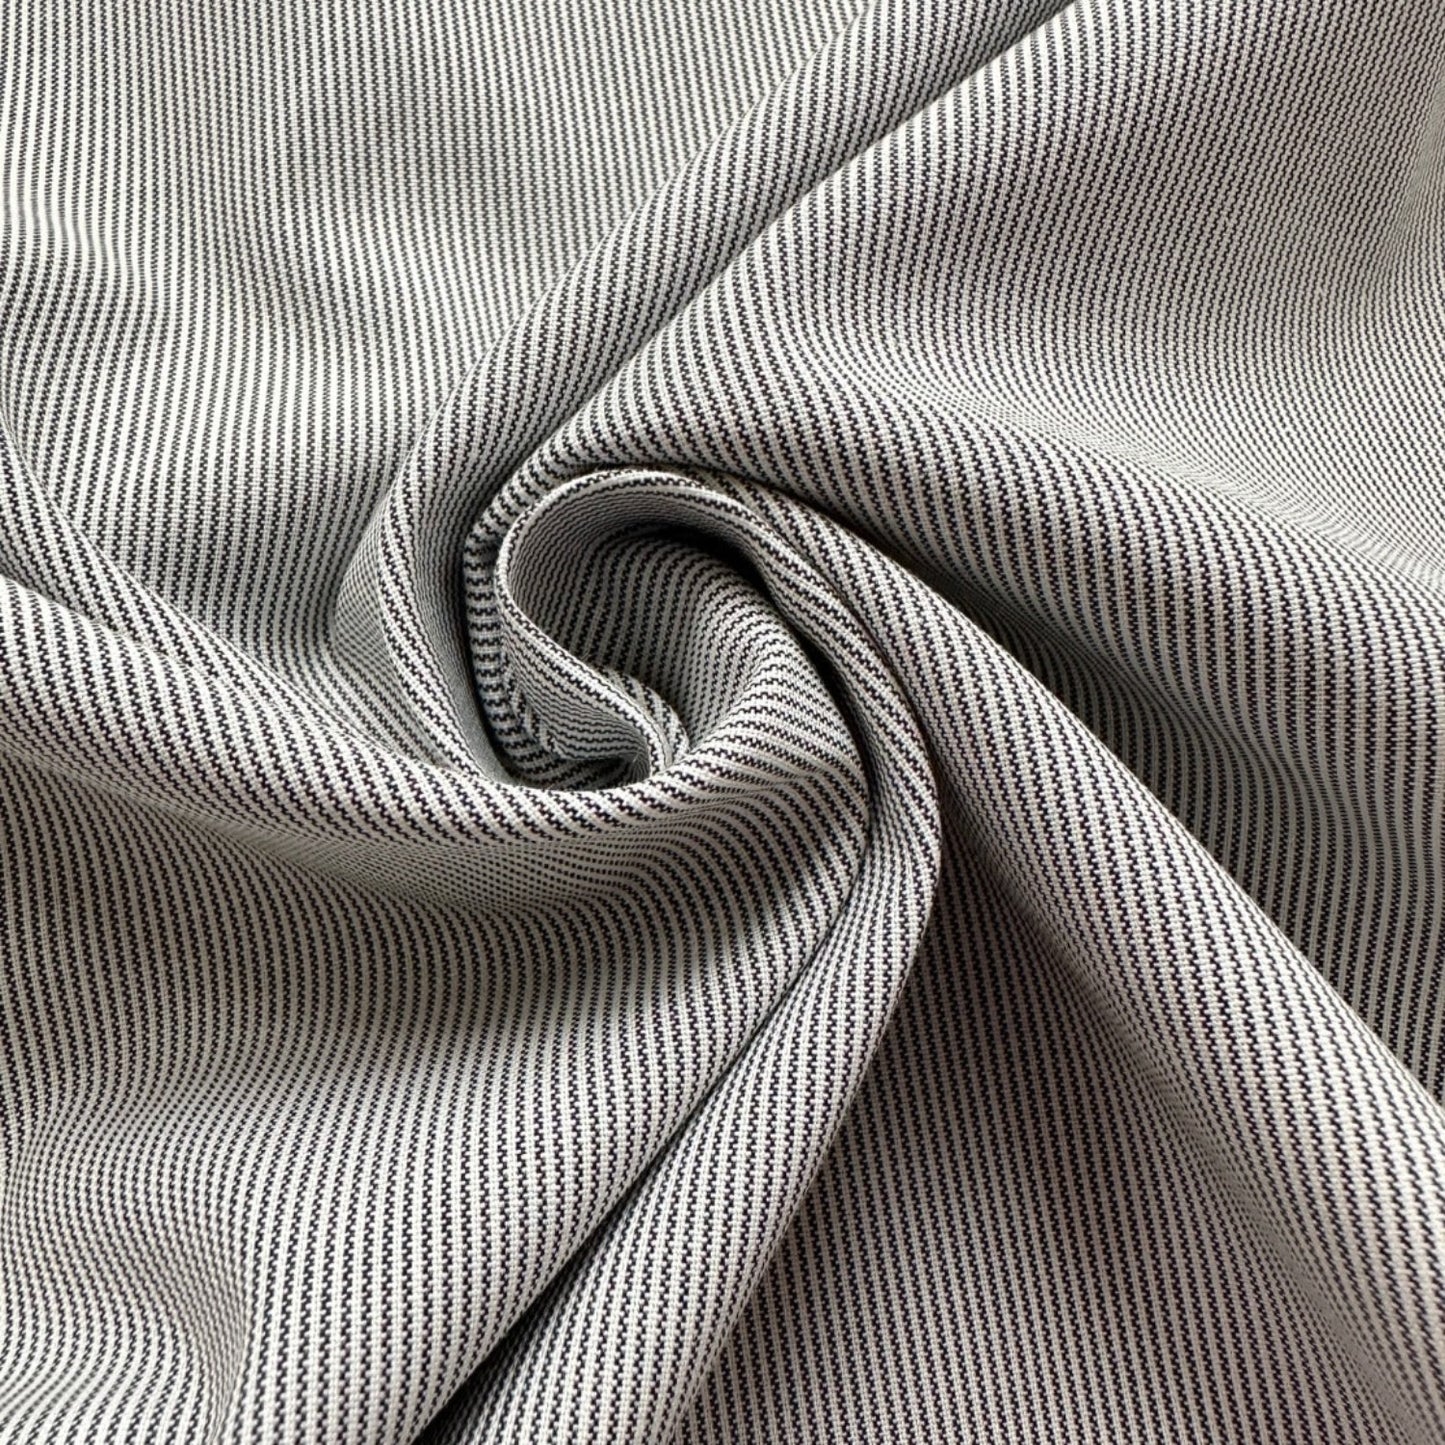 Grey and Ivory Striped Cotton Fabric